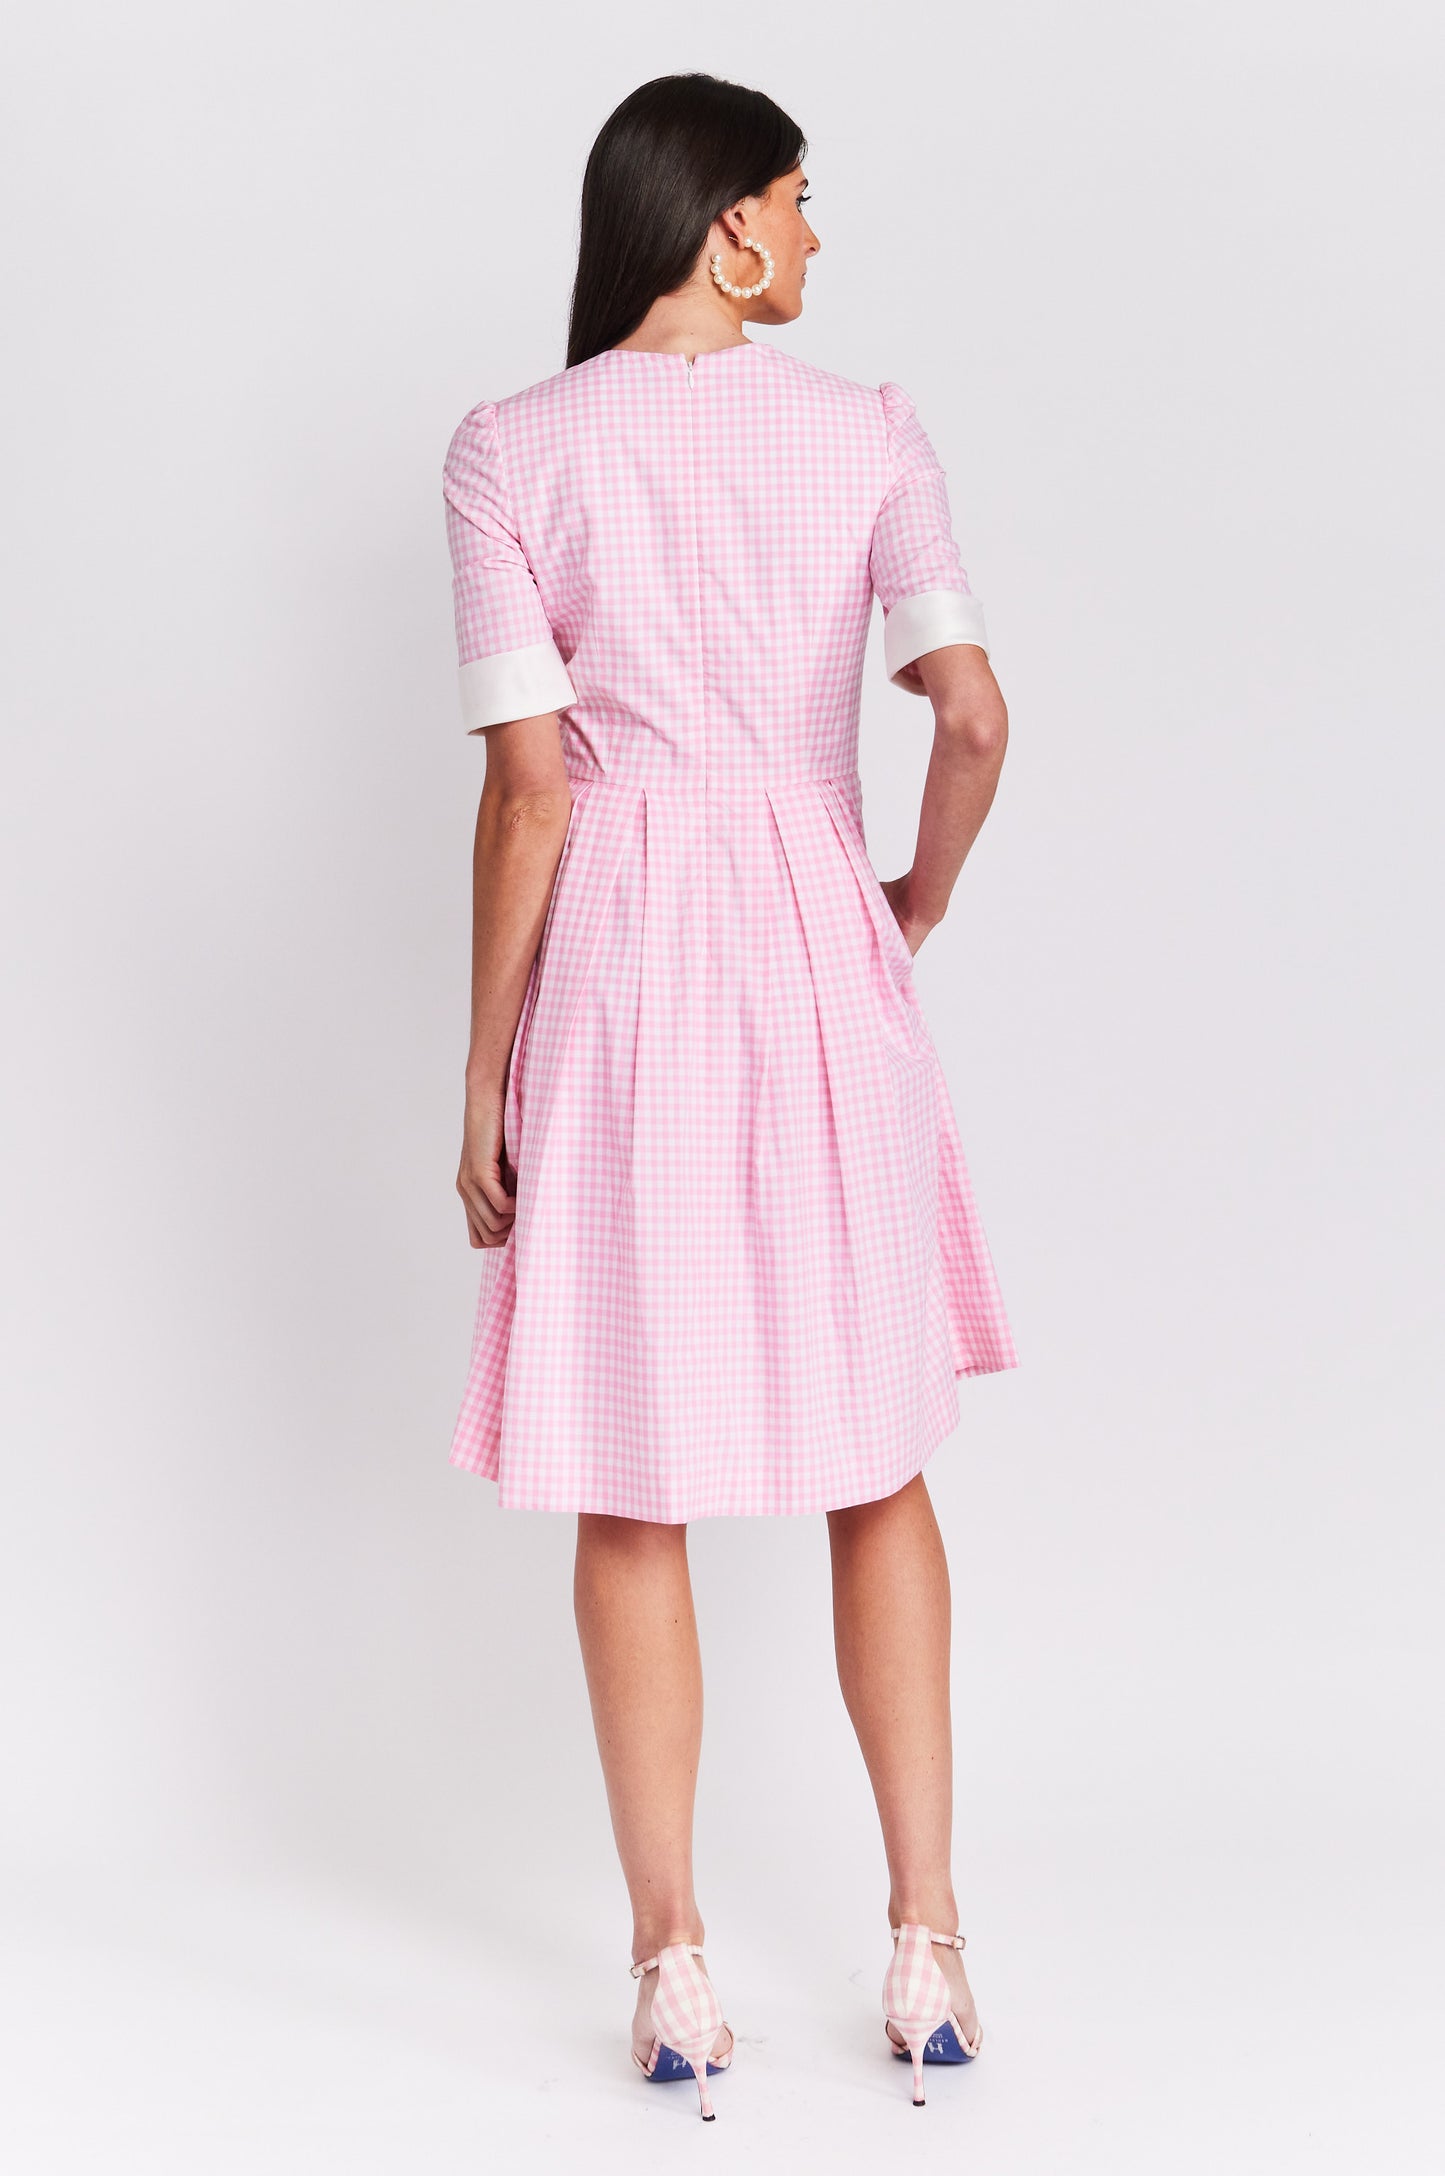 Molly in Pink Gingham